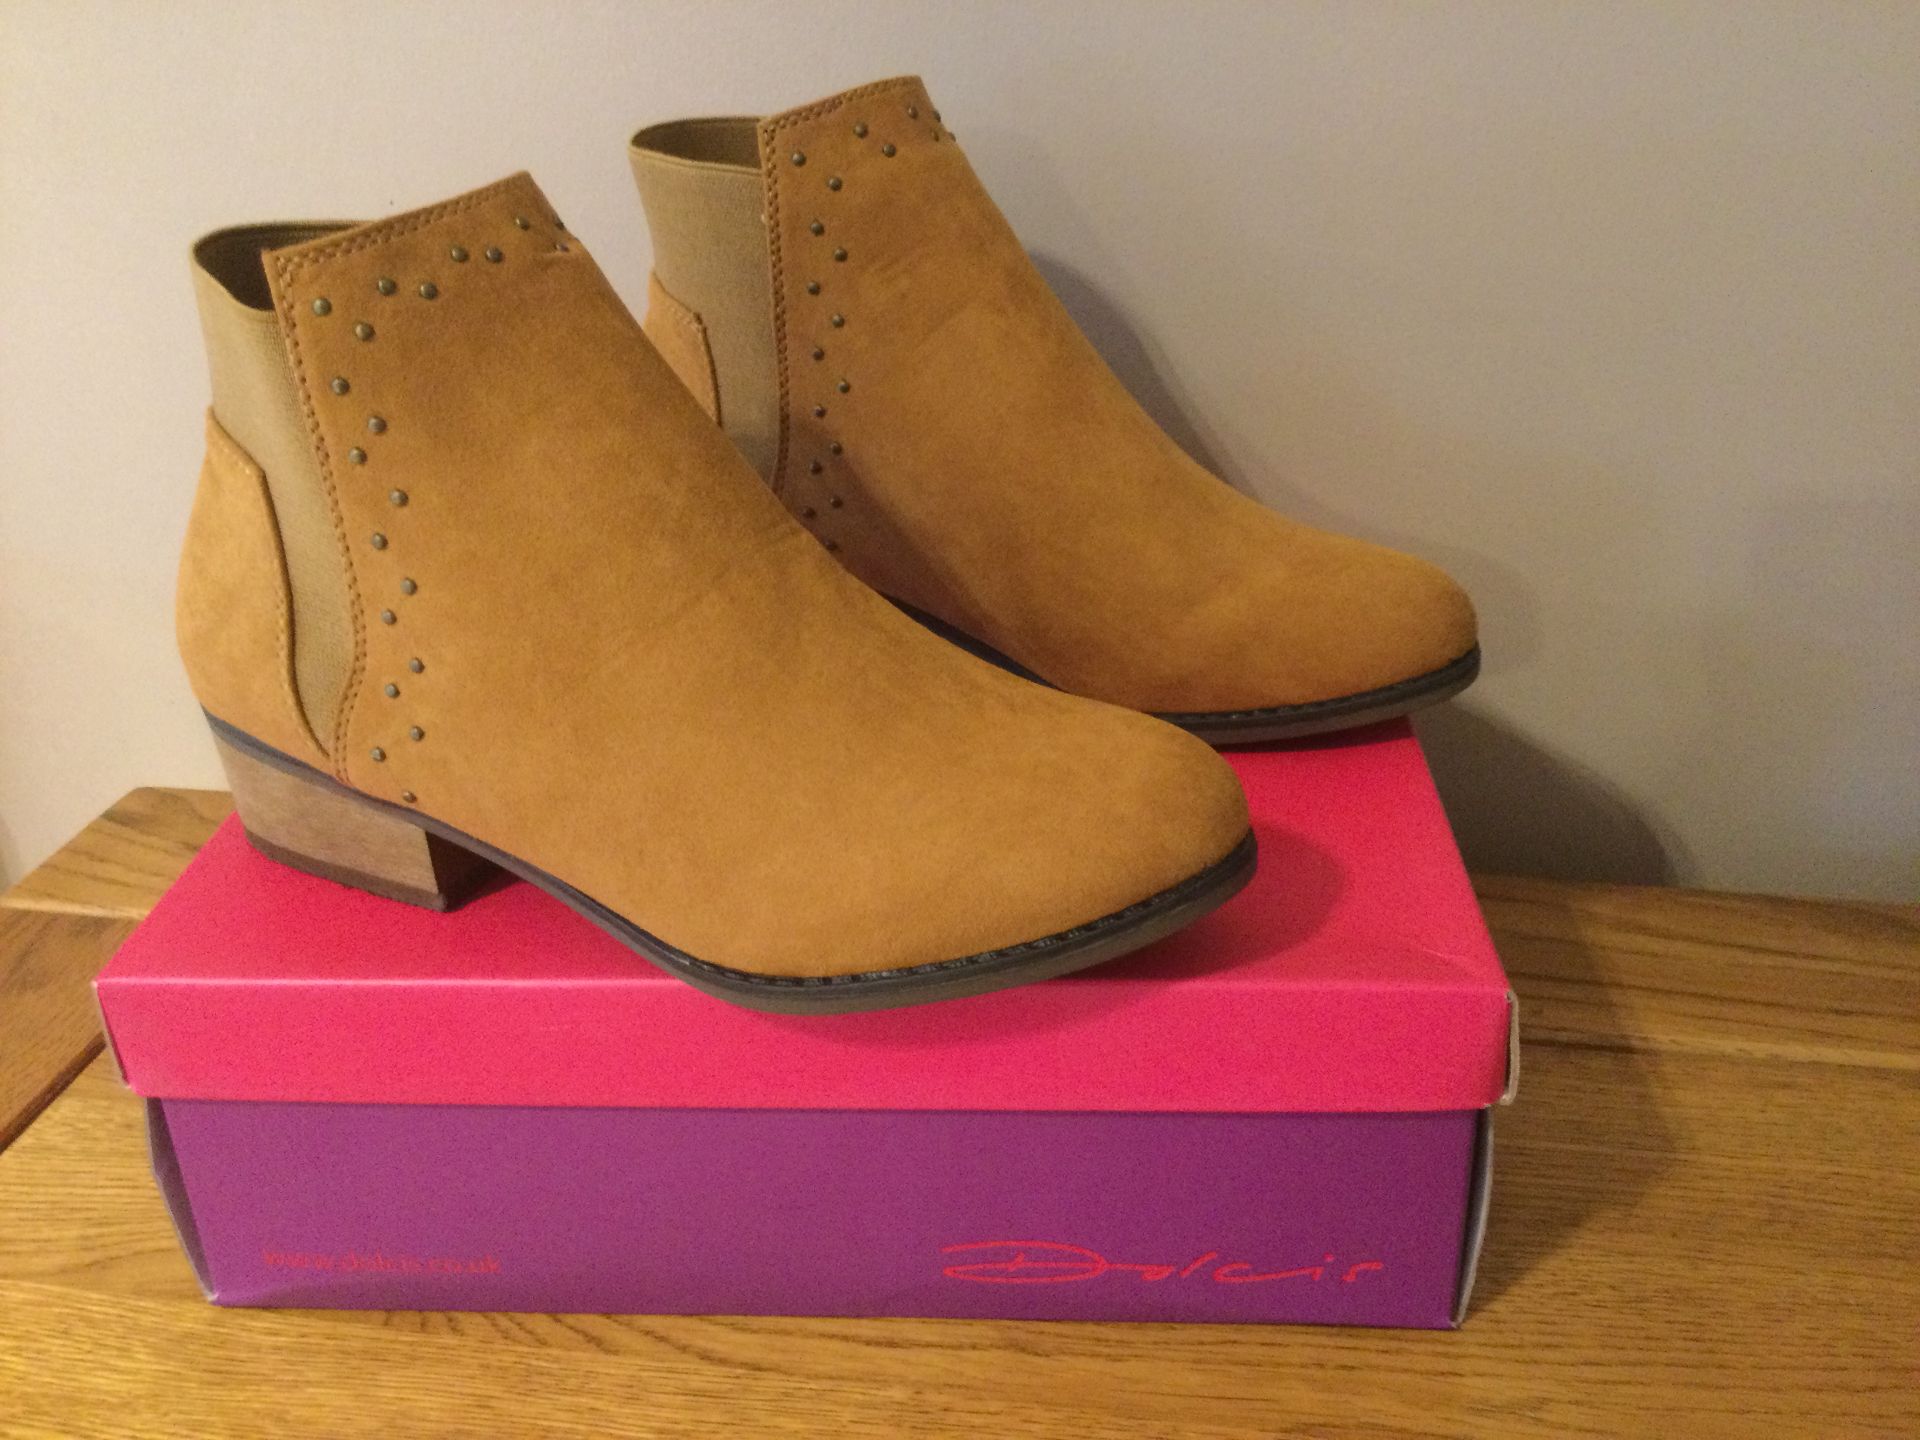 Dolcis “Wendy” Ankle Boots, Size 4, Tan - New RRP £45.00